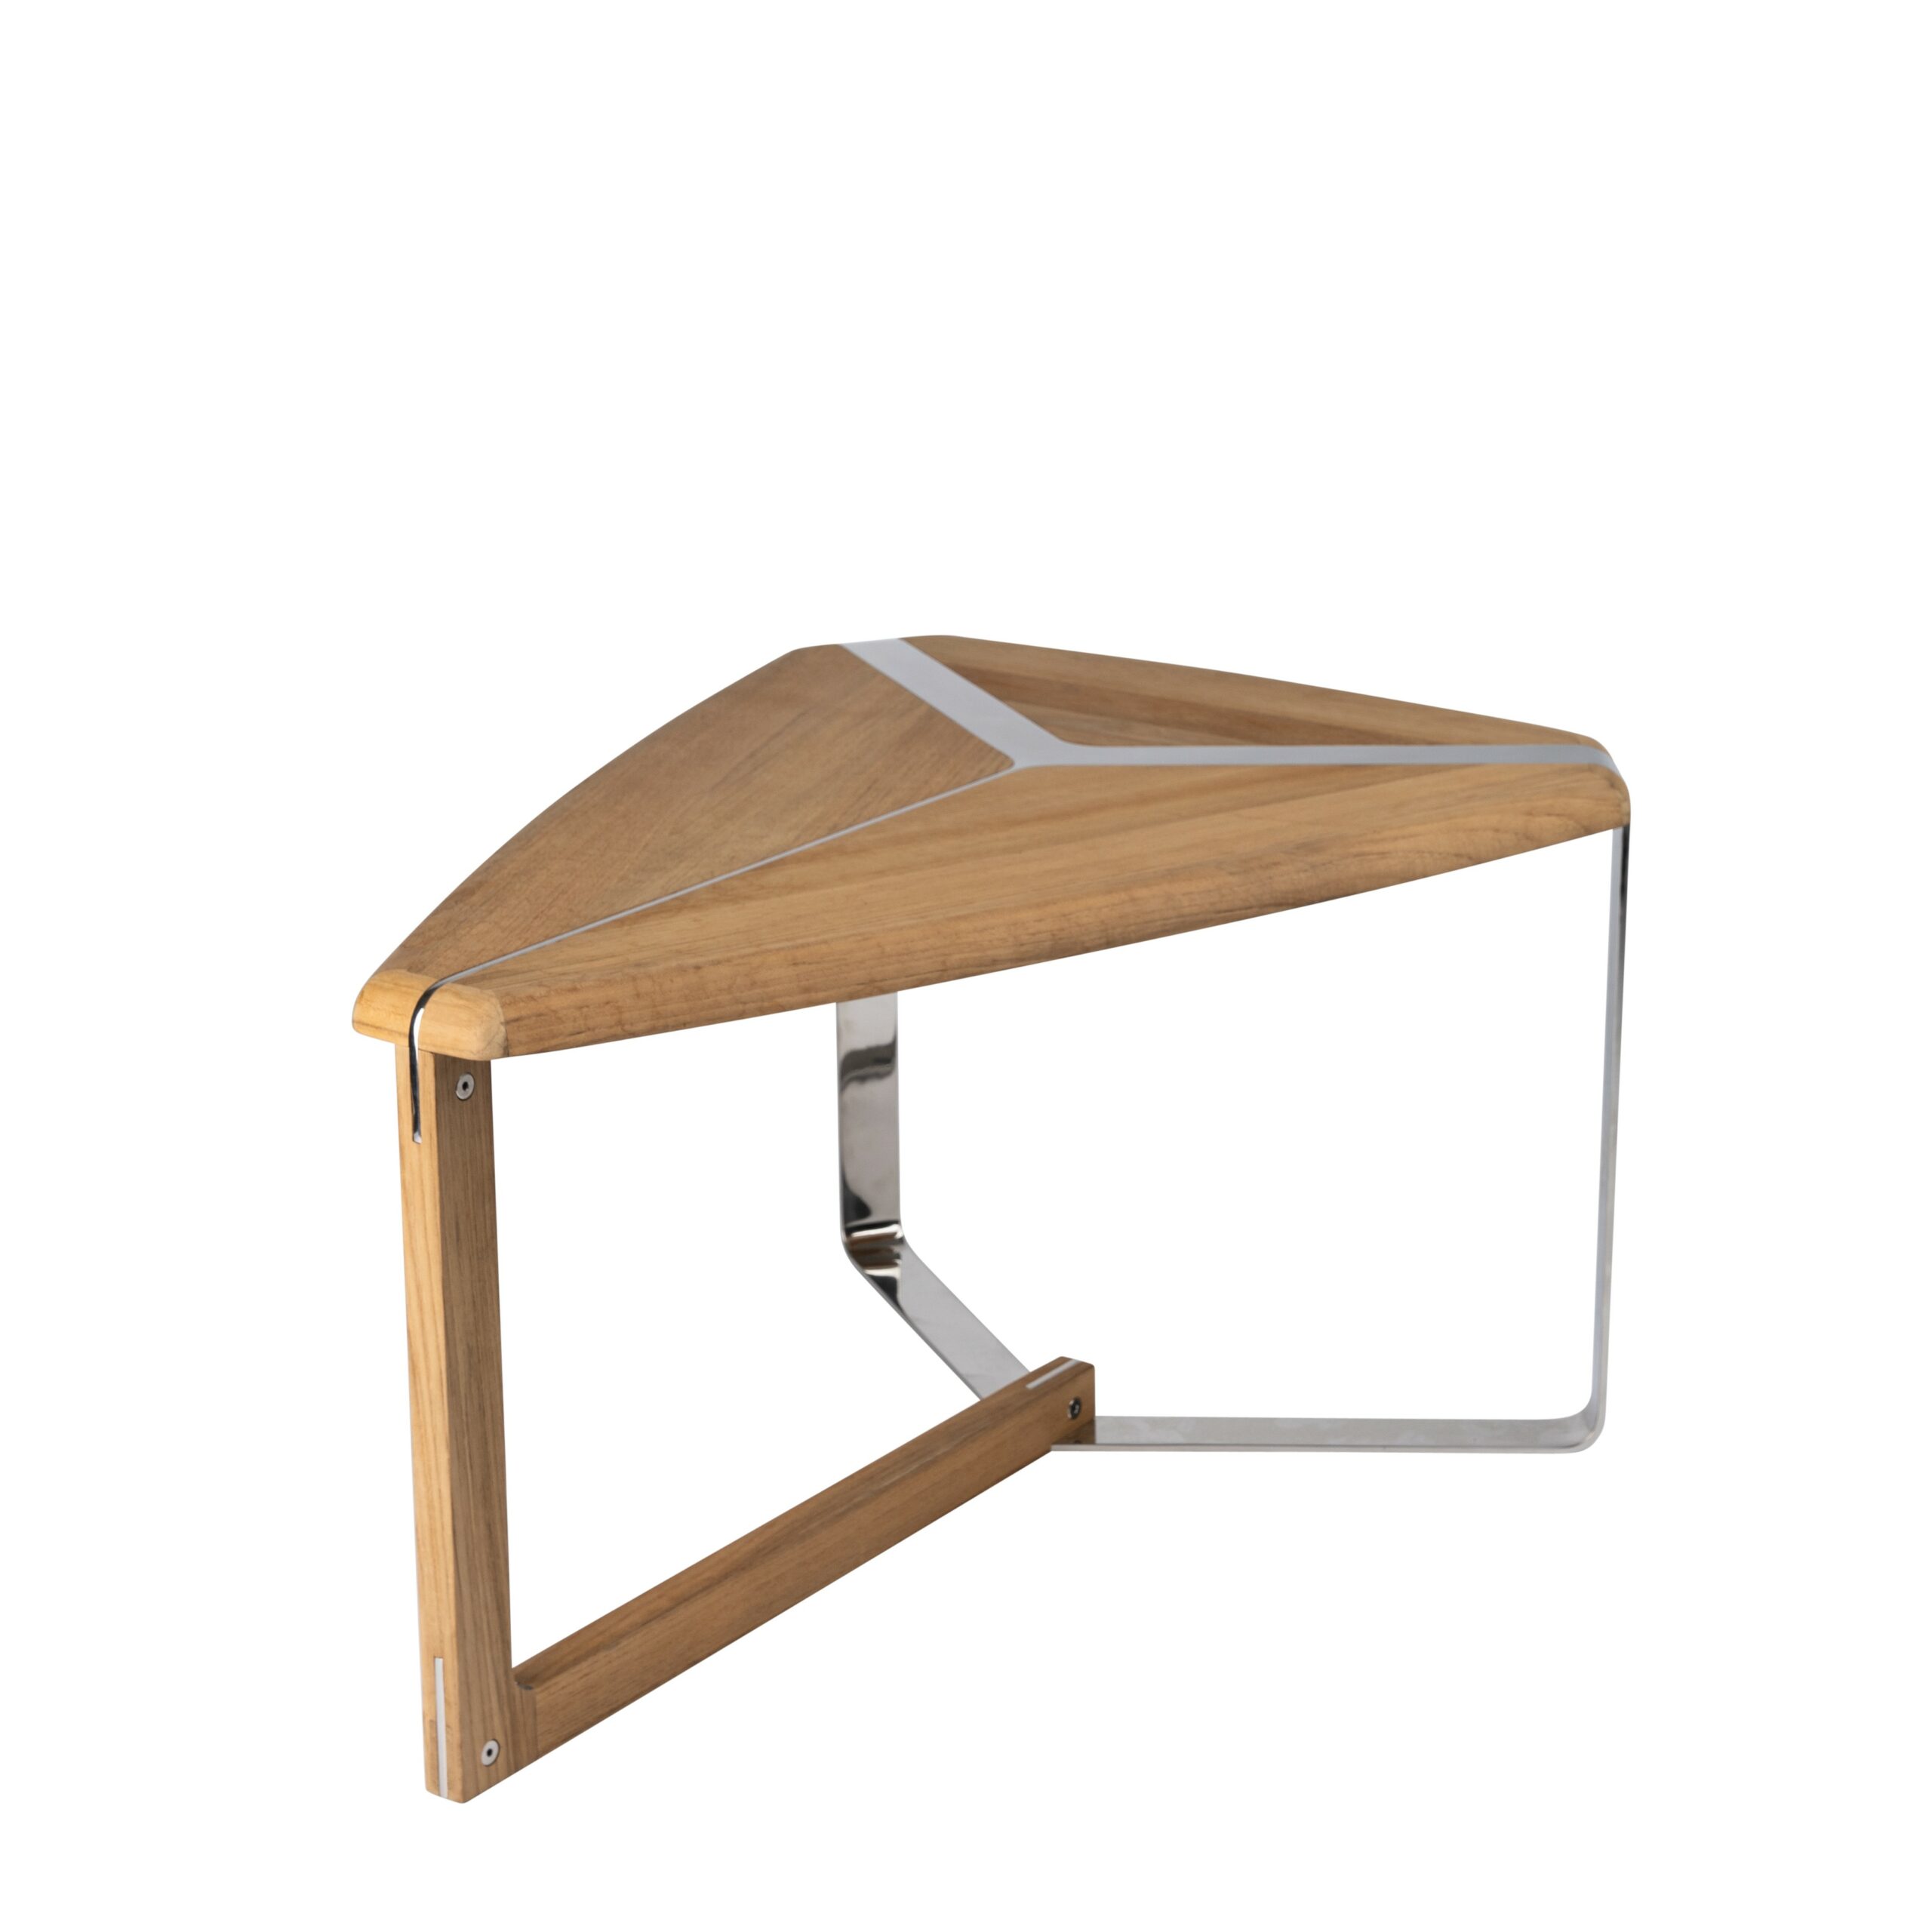 Oceana Triangle table by Sutherland